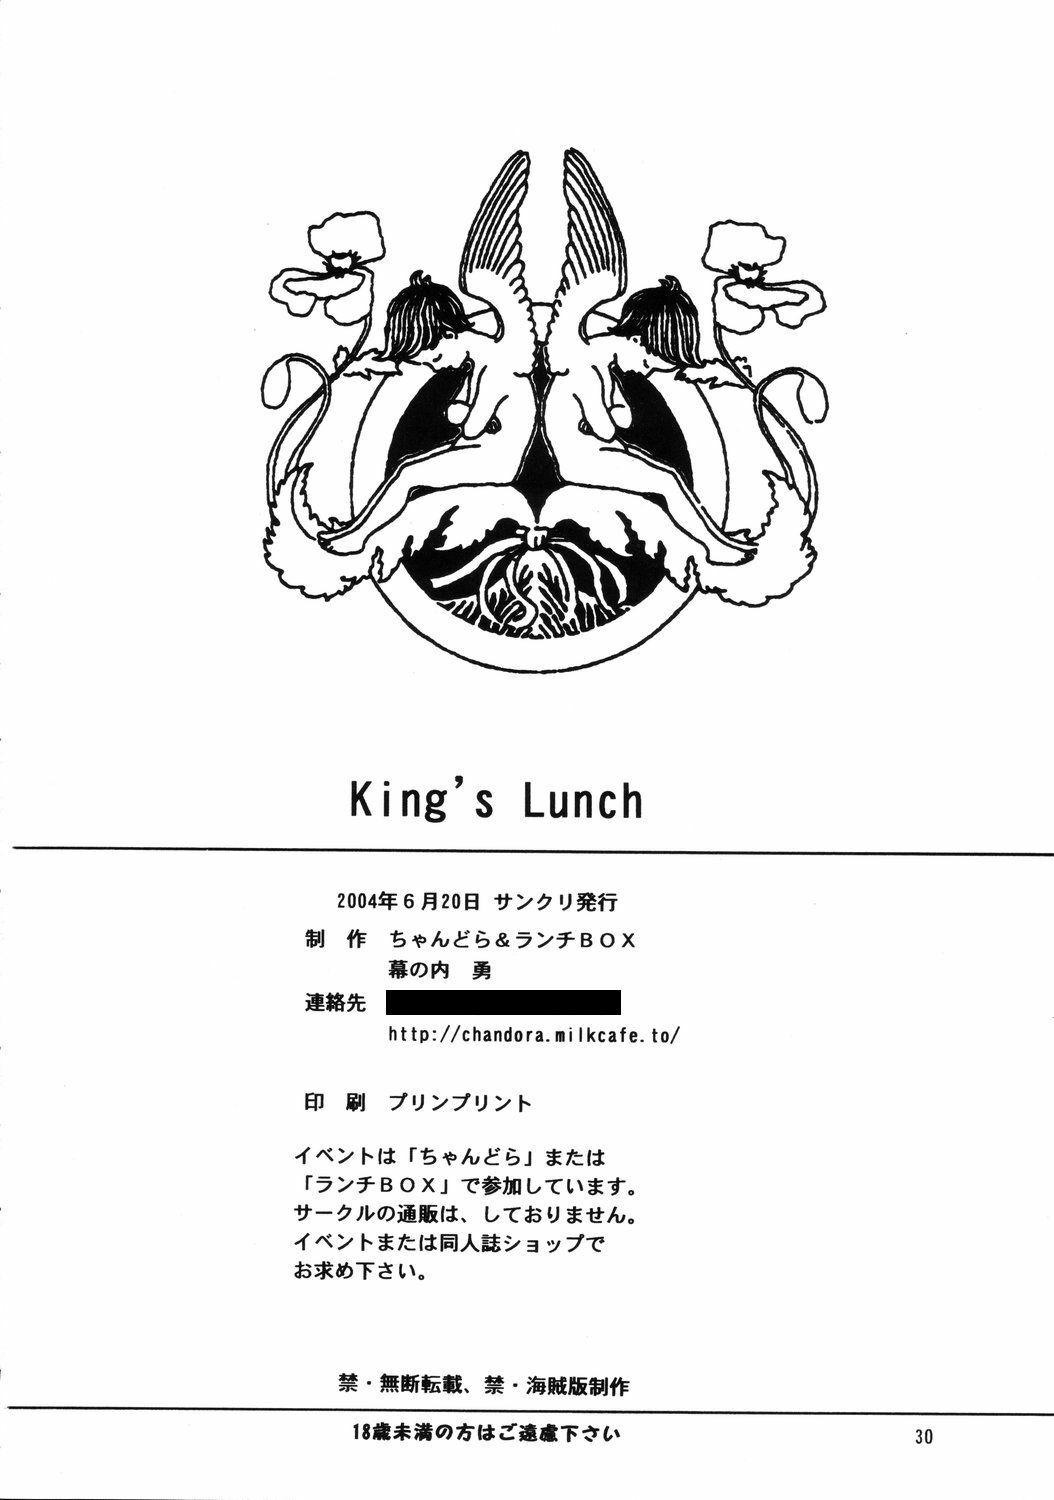 Lunch Box 62 - King's Lunch 29